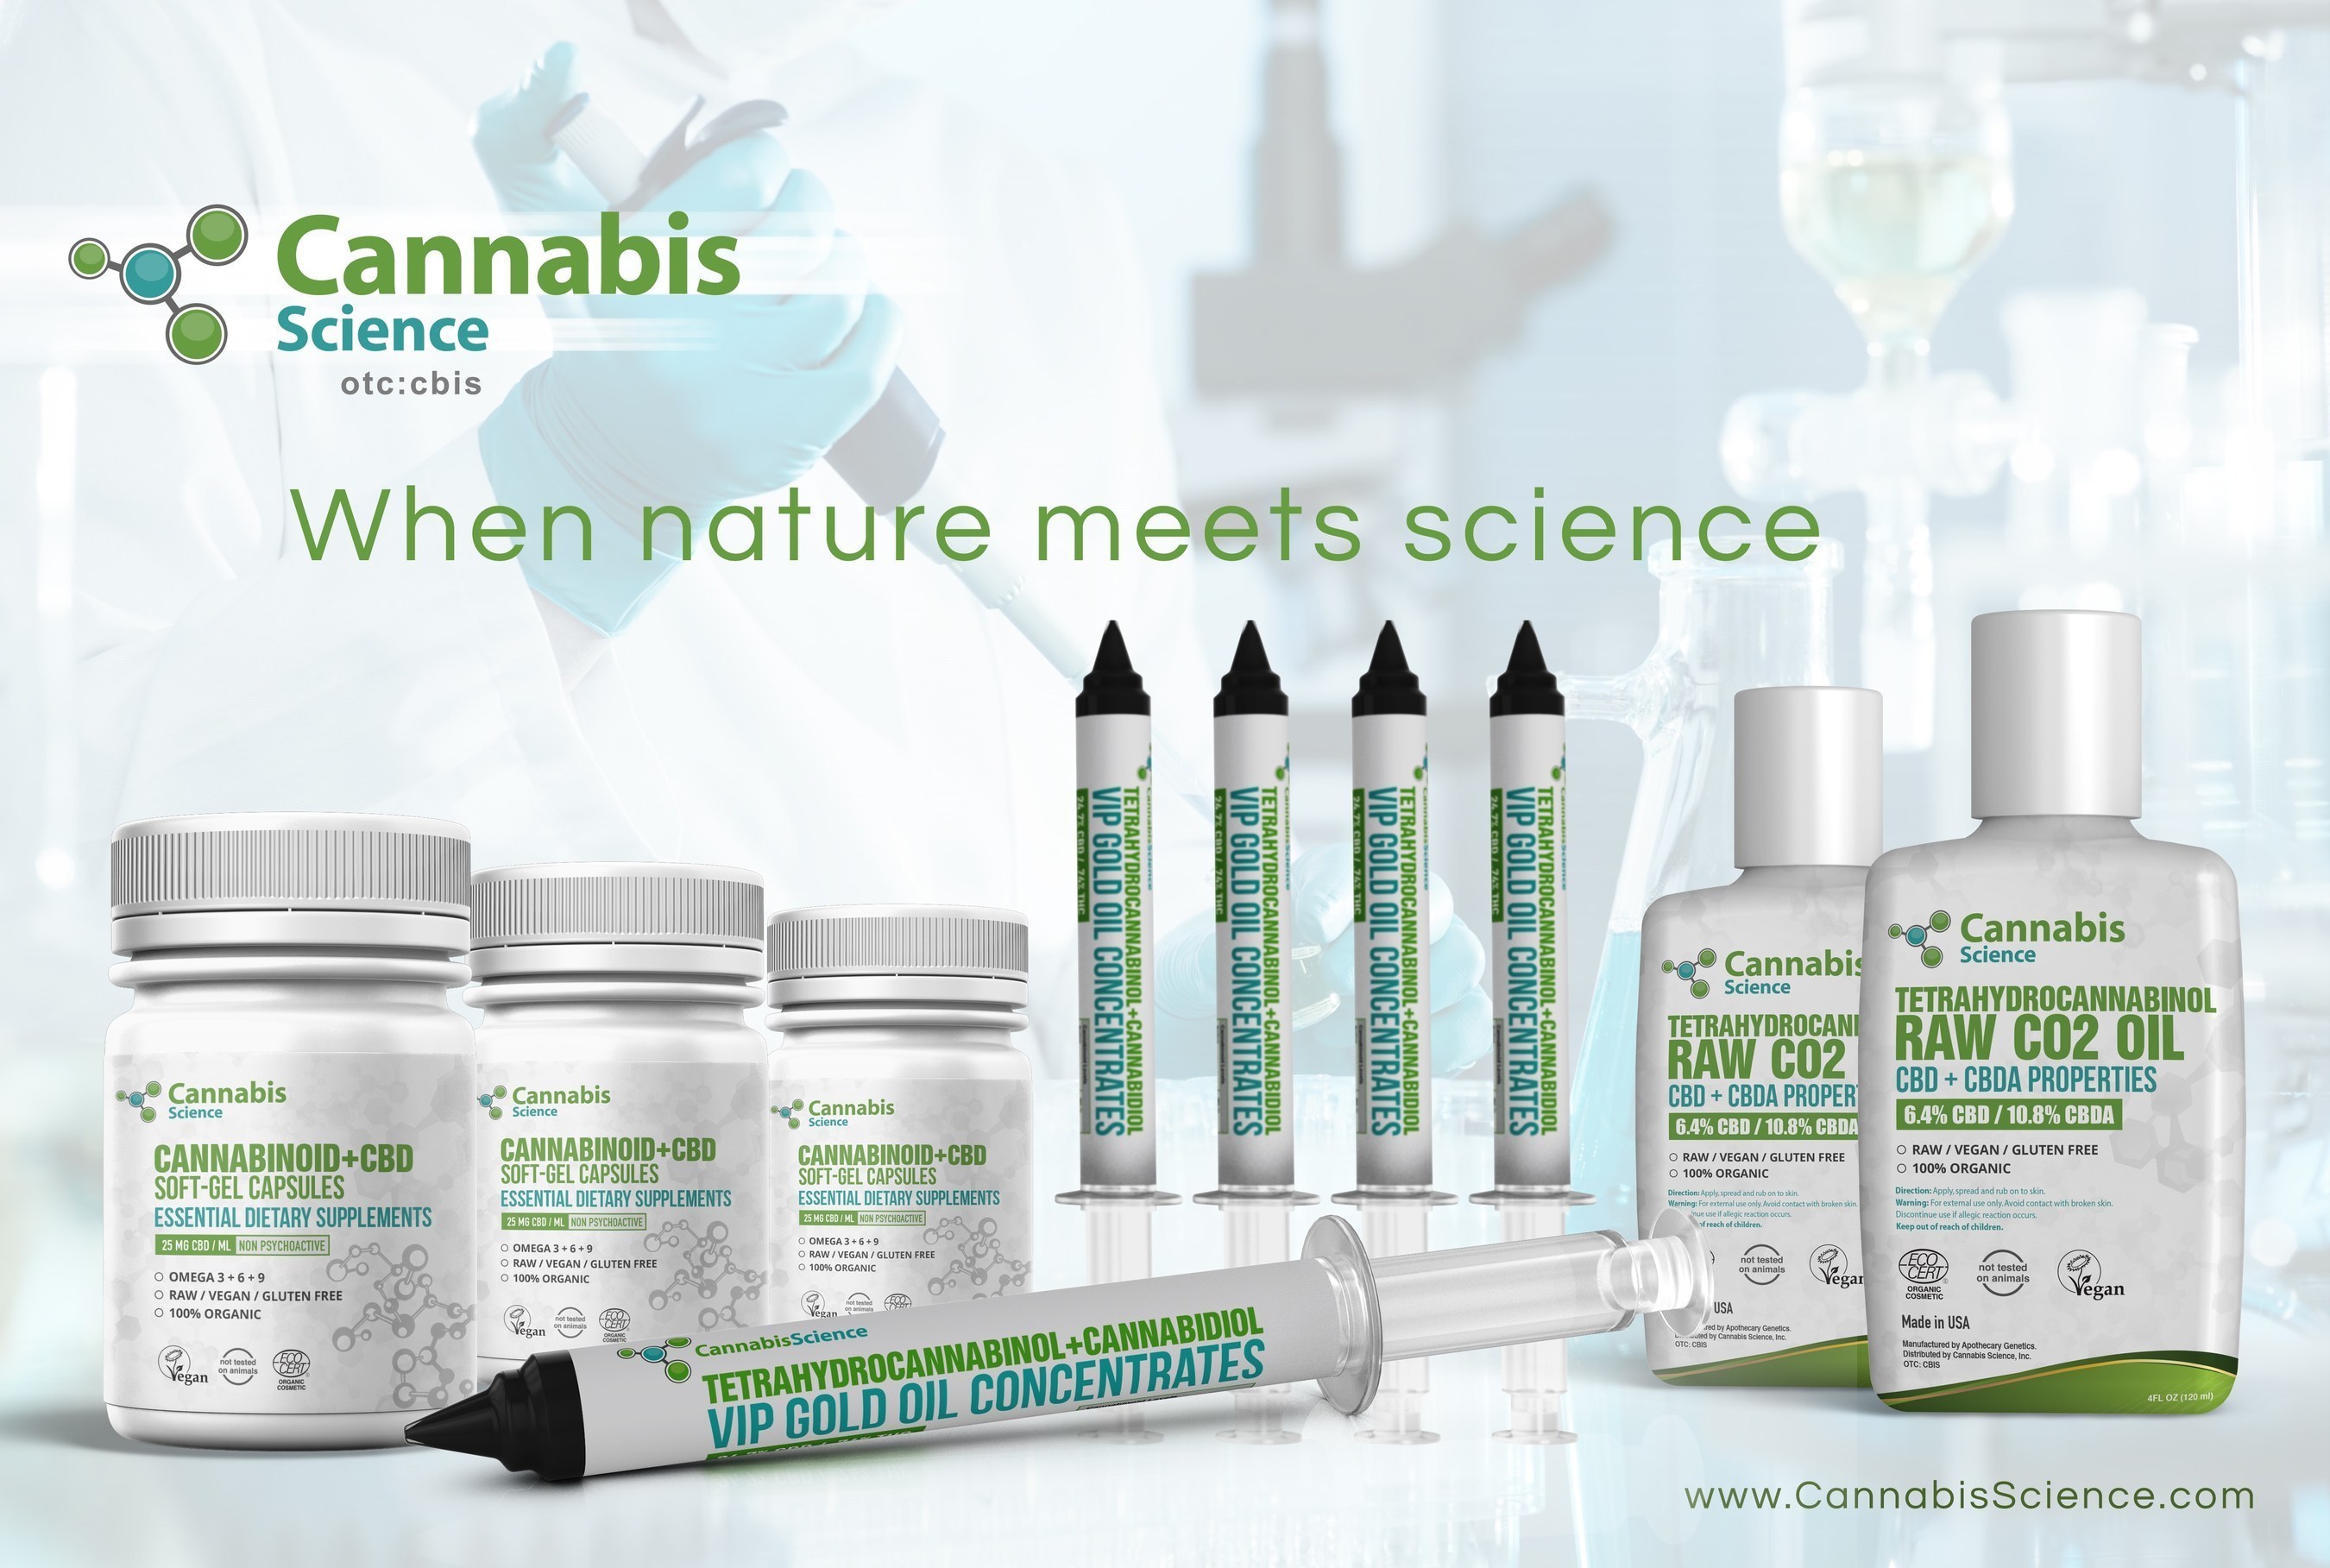 Preliminary packaging is now being secured and designs are completed for each jurisdiction. Please visit the beta version of the Cannabis Science Patient Access Center (PAC) http://pac.cannabisscience.com for product release information, patient usage tracking, share your usage and support stories with others worldwide, and valuable industry updates.